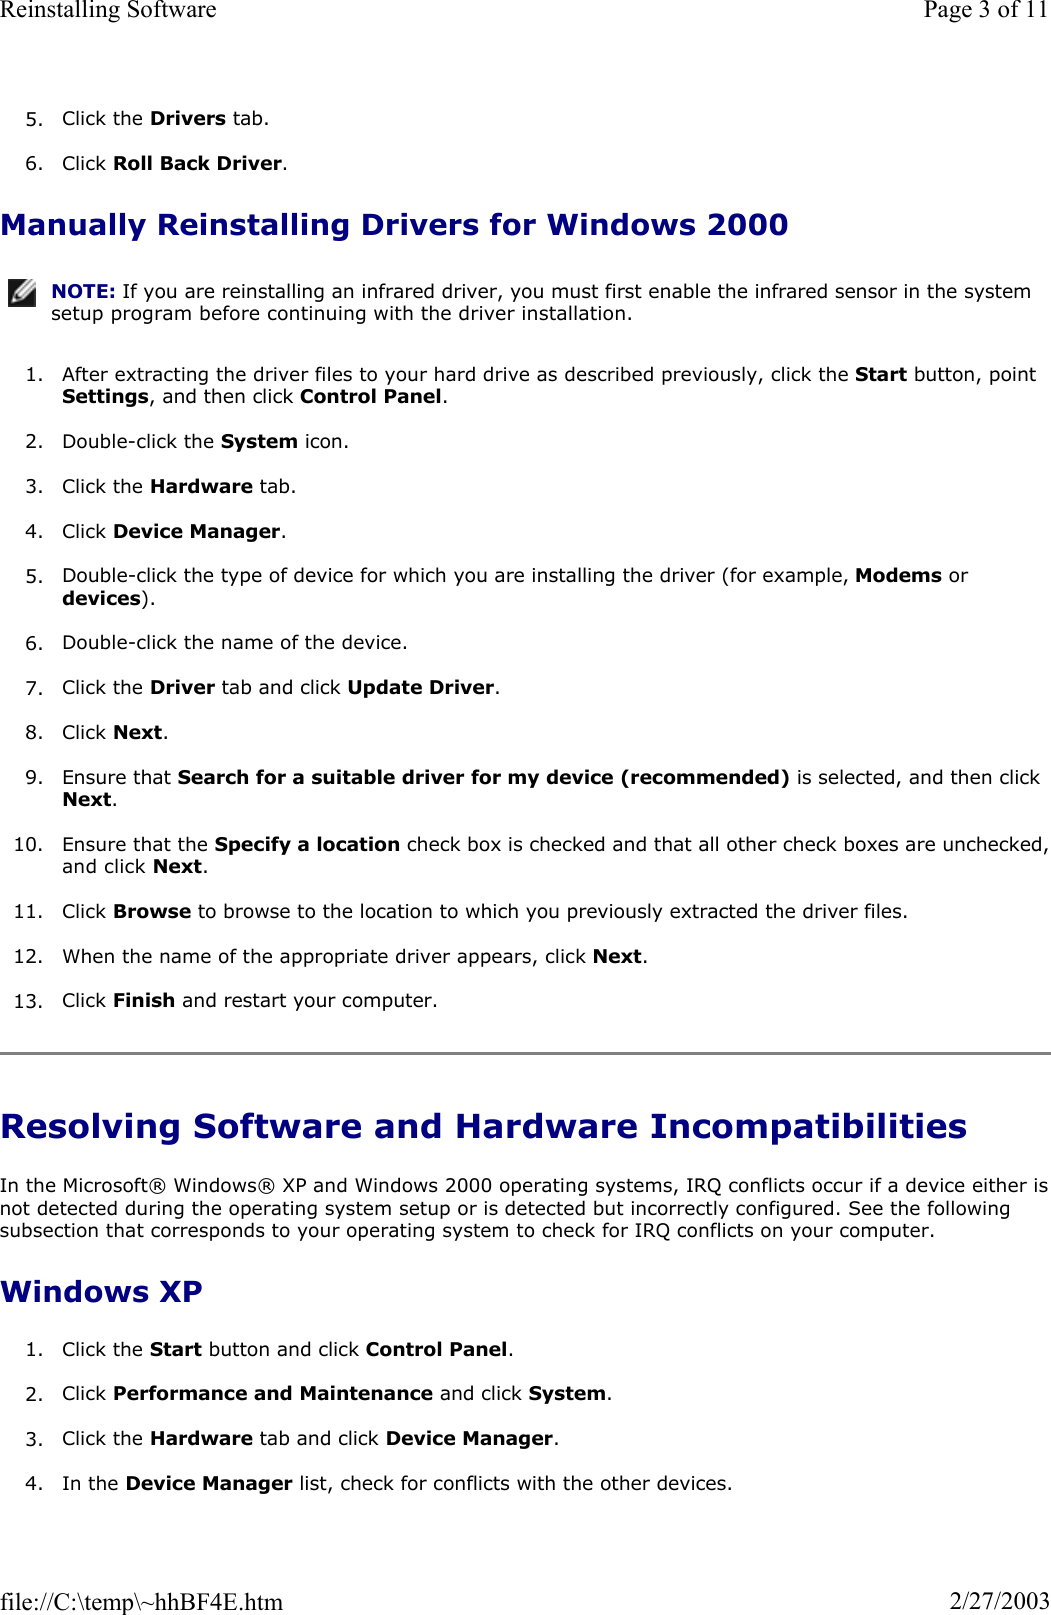 5. Click the Drivers tab.  6. Click Roll Back Driver.Manually Reinstalling Drivers for Windows 2000 1. After extracting the driver files to your hard drive as described previously, click the Start button, point Settings, and then click Control Panel.2. Double-click the System icon. 3. Click the Hardware tab. 4. Click Device Manager.5. Double-click the type of device for which you are installing the driver (for example, Modems or devices).6. Double-click the name of the device. 7. Click the Driver tab and click Update Driver.8. Click Next.9. Ensure that Search for a suitable driver for my device (recommended) is selected, and then click Next.10. Ensure that the Specify a location check box is checked and that all other check boxes are unchecked,and click Next.11. Click Browse to browse to the location to which you previously extracted the driver files. 12. When the name of the appropriate driver appears, click Next.13. Click Finish and restart your computer. Resolving Software and Hardware Incompatibilities In the Microsoft® Windows® XP and Windows 2000 operating systems, IRQ conflicts occur if a device either isnot detected during the operating system setup or is detected but incorrectly configured. See the following subsection that corresponds to your operating system to check for IRQ conflicts on your computer. Windows XP 1. Click the Start button and click Control Panel.2. Click Performance and Maintenance and click System.3. Click the Hardware tab and click Device Manager.4. In the Device Manager list, check for conflicts with the other devices.  NOTE: If you are reinstalling an infrared driver, you must first enable the infrared sensor in the system setup program before continuing with the driver installation.Page 3 of 11Reinstalling Software2/27/2003file://C:\temp\~hhBF4E.htm